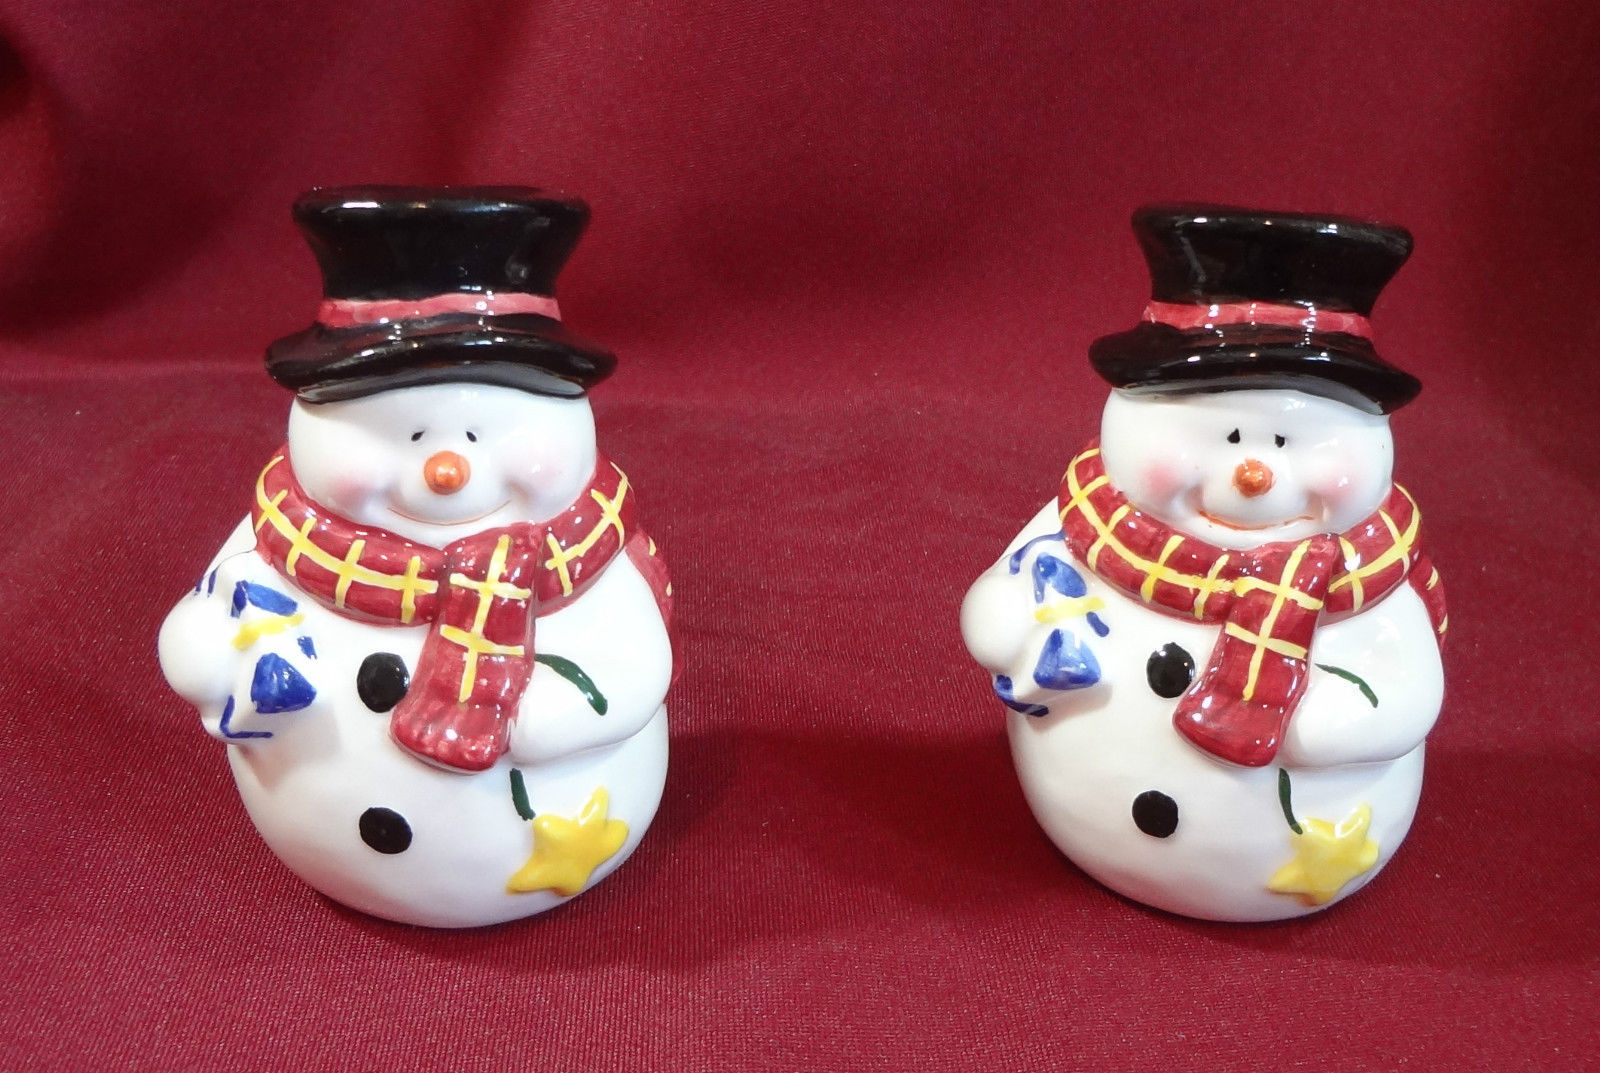 Snowmen Ceramic Salt and Pepper Shakers Top Hats Scarves Gifts Presents  - $6.99